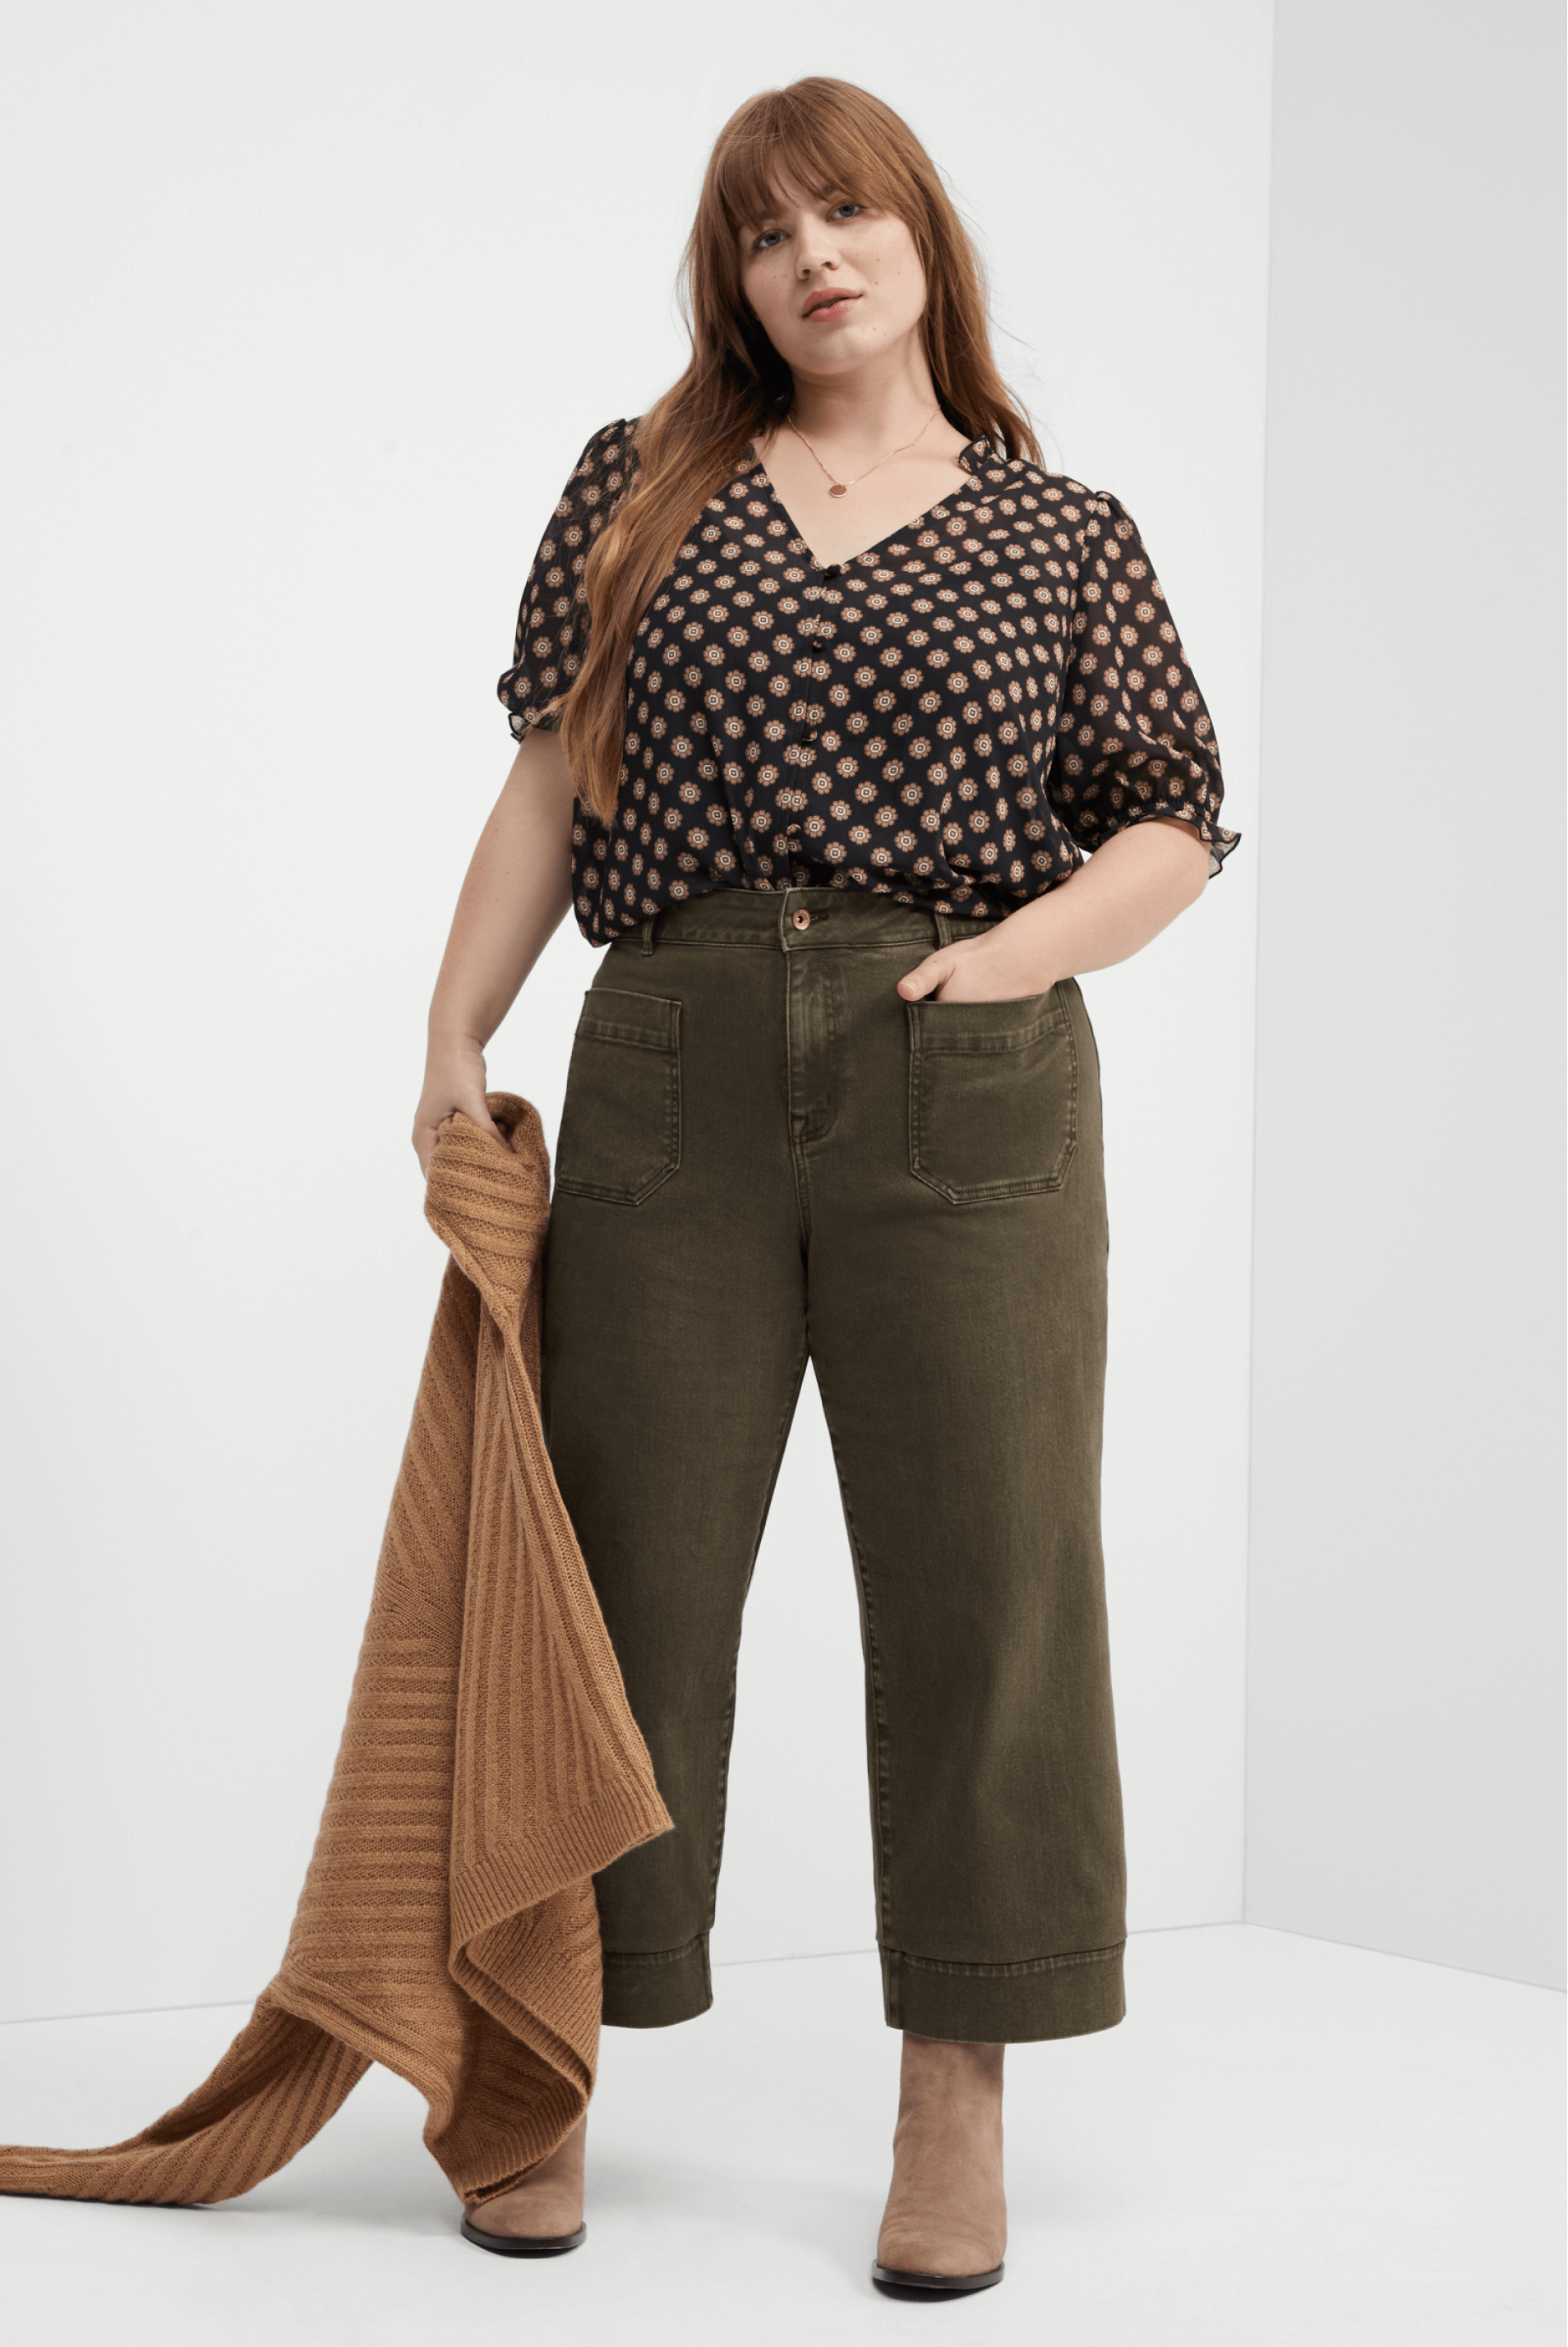 women's fall outfit with dark olive jeans